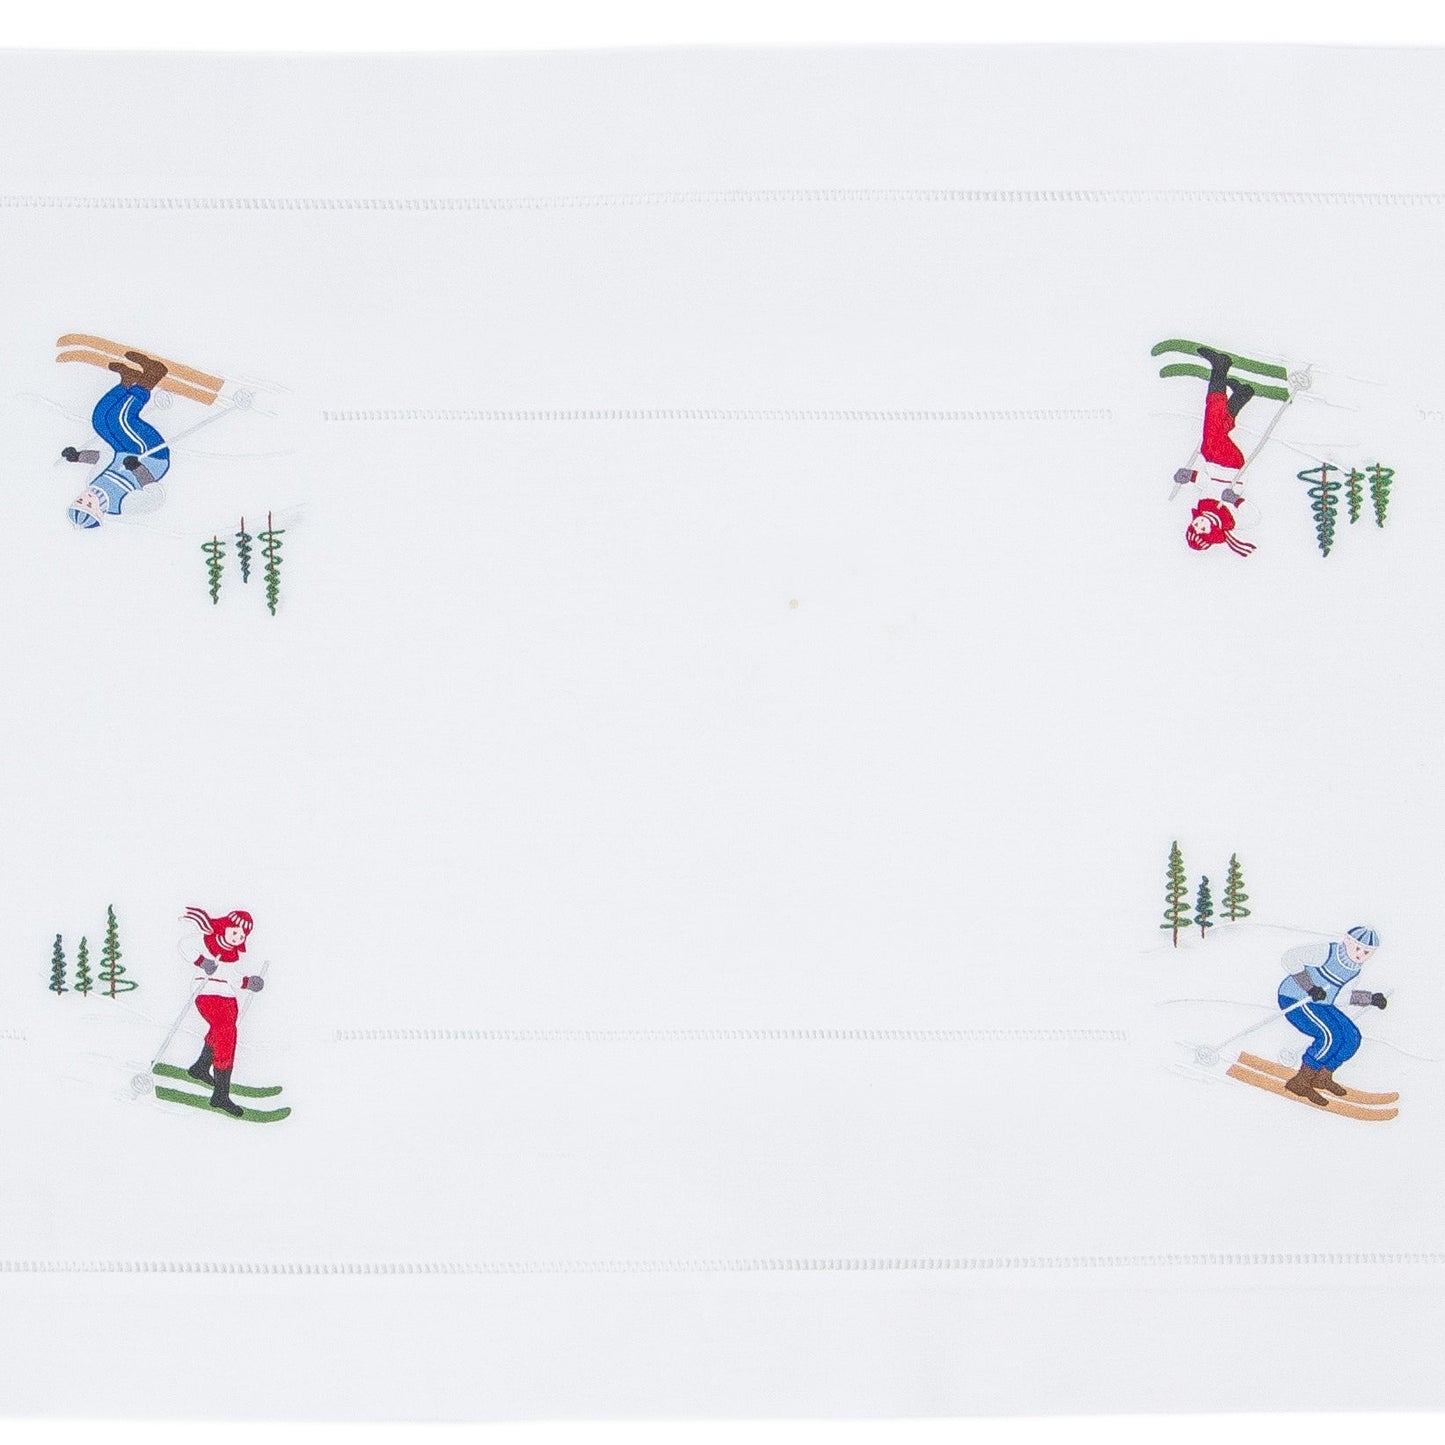 A white table runner with a hemstitch border. Skiers are embroidered in a border around the edge